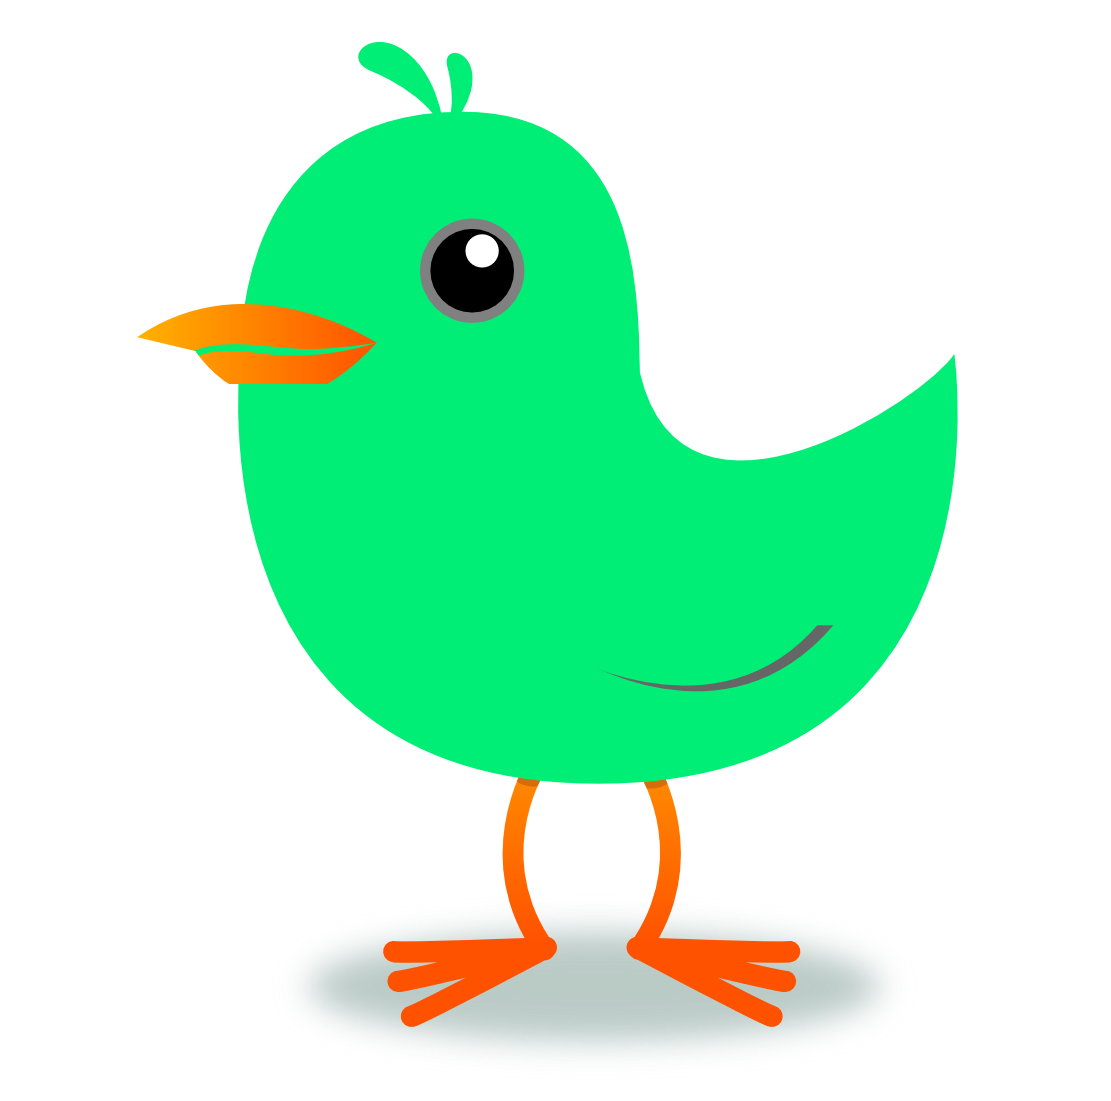 Spring Birds Clipart - Free Clipart Images